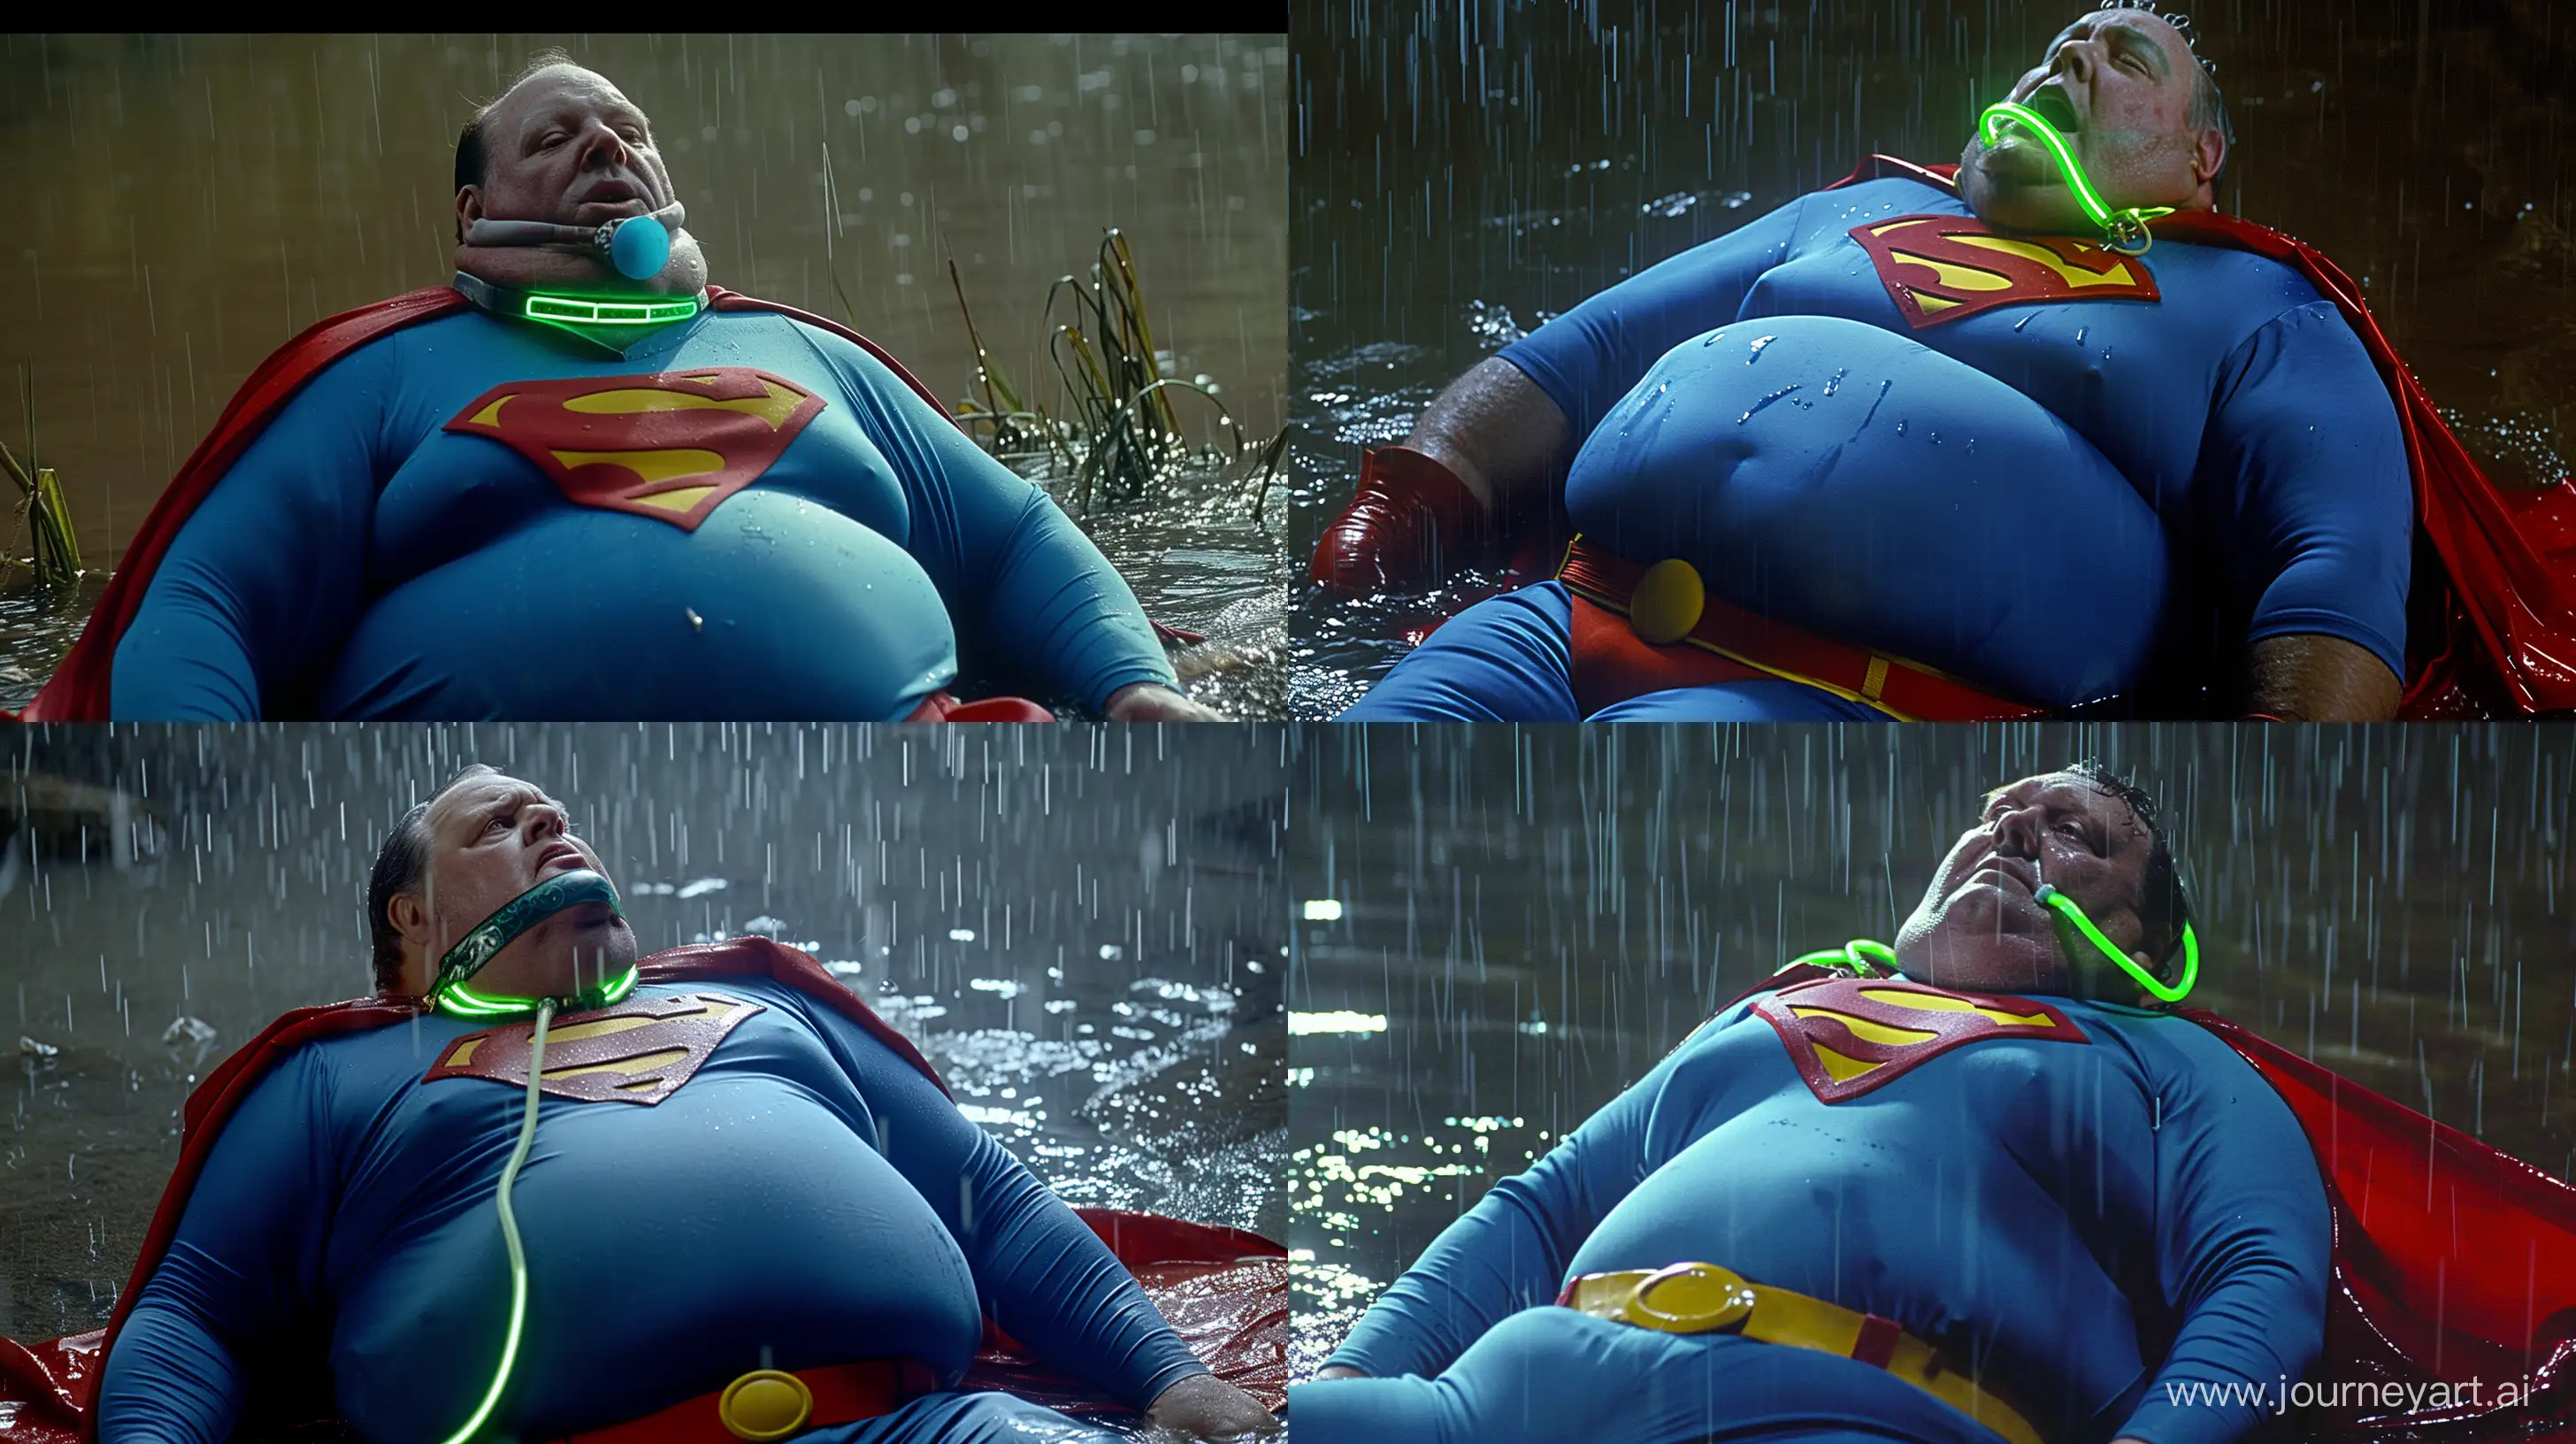 Eccentric-60YearOld-in-Vintage-Superman-Costume-Braving-the-Rain-with-Gag-and-Neon-Collar